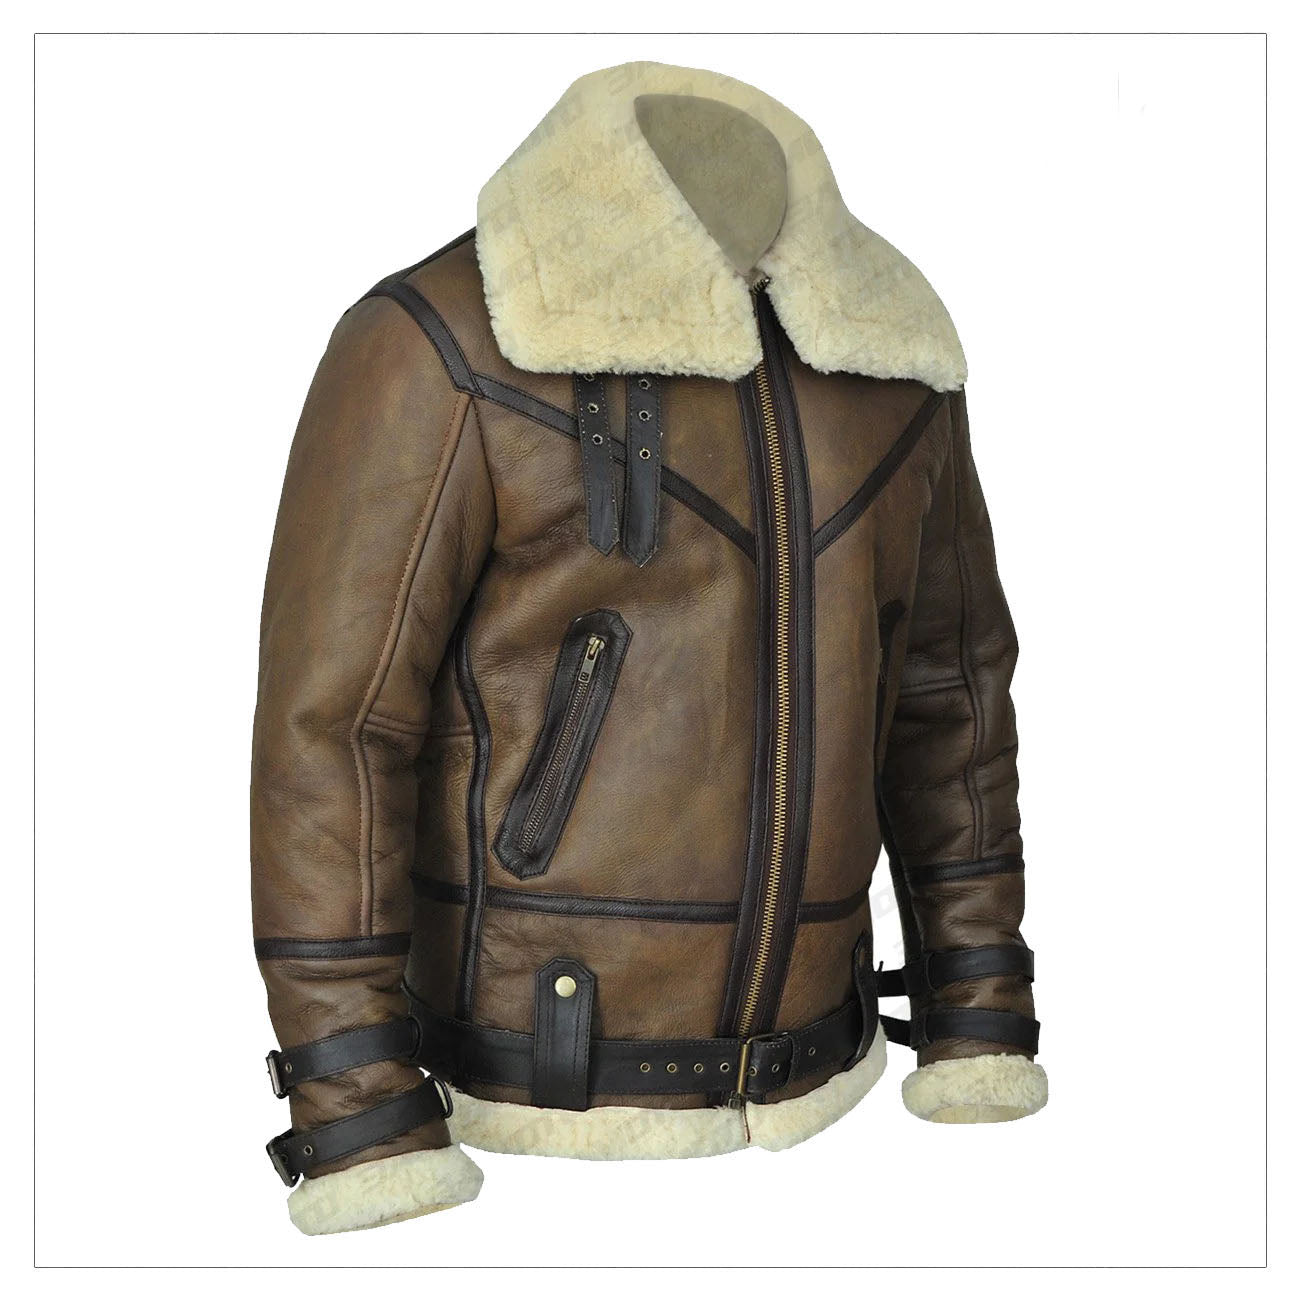 New Men Aviator Airforce B3 Bomber Shearling Leather Jacket